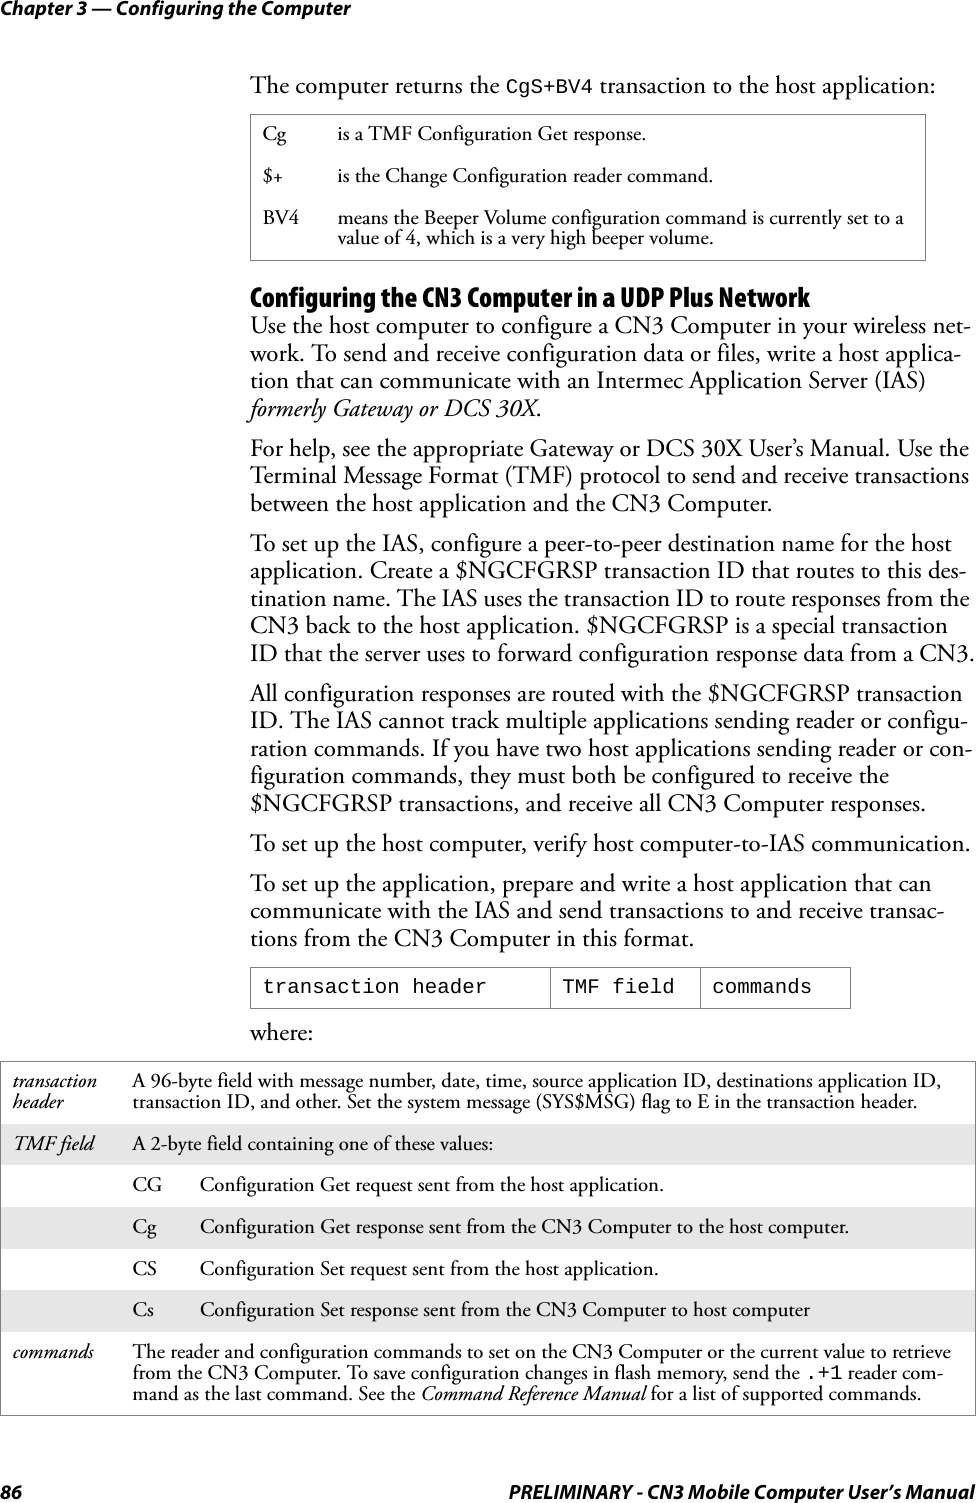 Chapter 3 — Configuring the Computer86 PRELIMINARY - CN3 Mobile Computer User’s ManualThe computer returns the CgS+BV4 transaction to the host application:Configuring the CN3 Computer in a UDP Plus NetworkUse the host computer to configure a CN3 Computer in your wireless net-work. To send and receive configuration data or files, write a host applica-tion that can communicate with an Intermec Application Server (IAS) formerly Gateway or DCS 30X.For help, see the appropriate Gateway or DCS 30X User’s Manual. Use the Terminal Message Format (TMF) protocol to send and receive transactions between the host application and the CN3 Computer.To set up the IAS, configure a peer-to-peer destination name for the host application. Create a $NGCFGRSP transaction ID that routes to this des-tination name. The IAS uses the transaction ID to route responses from the CN3 back to the host application. $NGCFGRSP is a special transaction ID that the server uses to forward configuration response data from a CN3.All configuration responses are routed with the $NGCFGRSP transaction ID. The IAS cannot track multiple applications sending reader or configu-ration commands. If you have two host applications sending reader or con-figuration commands, they must both be configured to receive the $NGCFGRSP transactions, and receive all CN3 Computer responses.To set up the host computer, verify host computer-to-IAS communication.To set up the application, prepare and write a host application that can communicate with the IAS and send transactions to and receive transac-tions from the CN3 Computer in this format.where:Cg is a TMF Configuration Get response.$+ is the Change Configuration reader command.BV4 means the Beeper Volume configuration command is currently set to a value of 4, which is a very high beeper volume.transaction header TMF field commandstransaction headerA 96-byte field with message number, date, time, source application ID, destinations application ID, transaction ID, and other. Set the system message (SYS$MSG) flag to E in the transaction header.TMF field A 2-byte field containing one of these values:CG Configuration Get request sent from the host application.Cg Configuration Get response sent from the CN3 Computer to the host computer.CS Configuration Set request sent from the host application.Cs Configuration Set response sent from the CN3 Computer to host computercommands The reader and configuration commands to set on the CN3 Computer or the current value to retrieve from the CN3 Computer. To save configuration changes in flash memory, send the .+1 reader com-mand as the last command. See the Command Reference Manual for a list of supported commands.